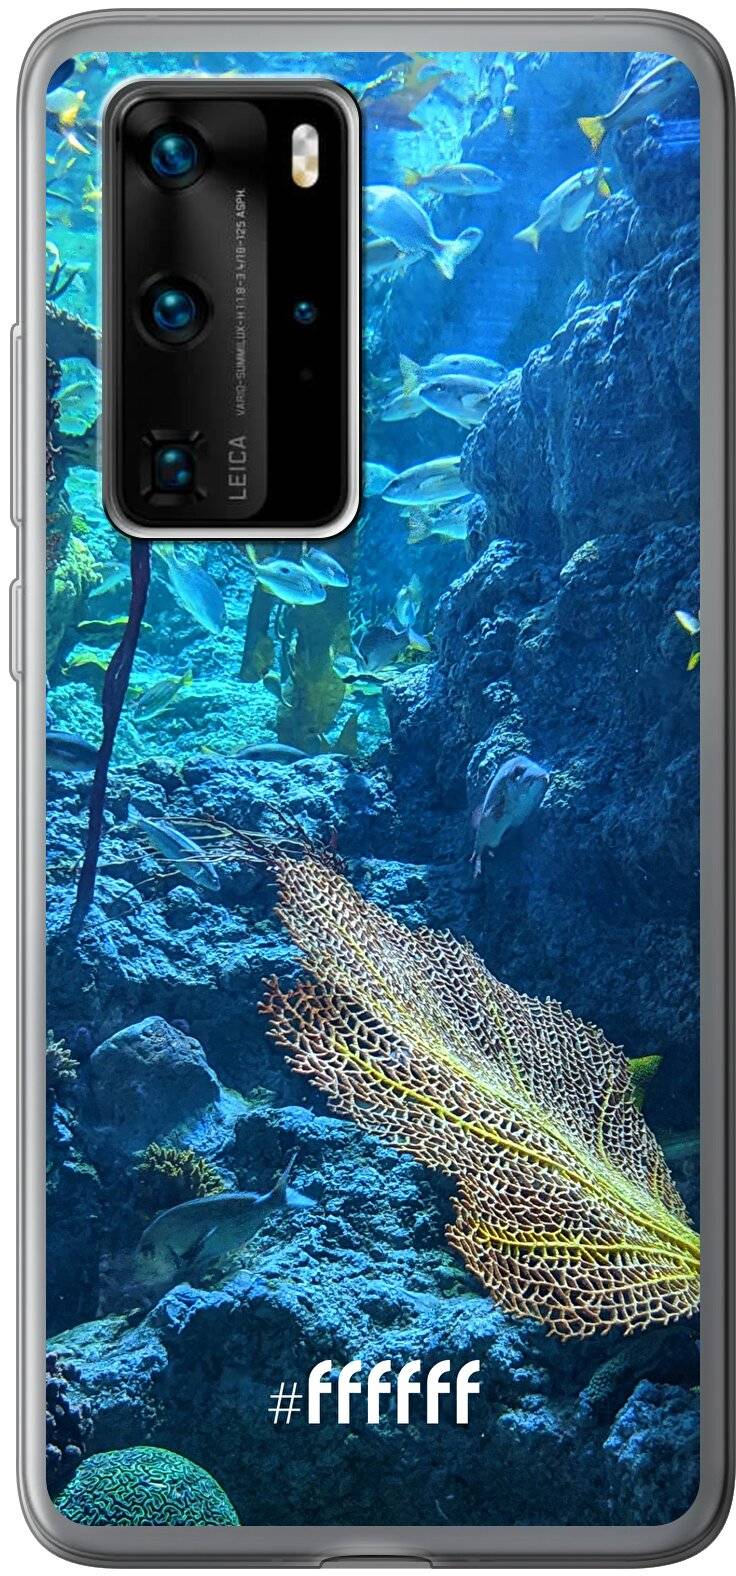 Coral Reef P40 Pro